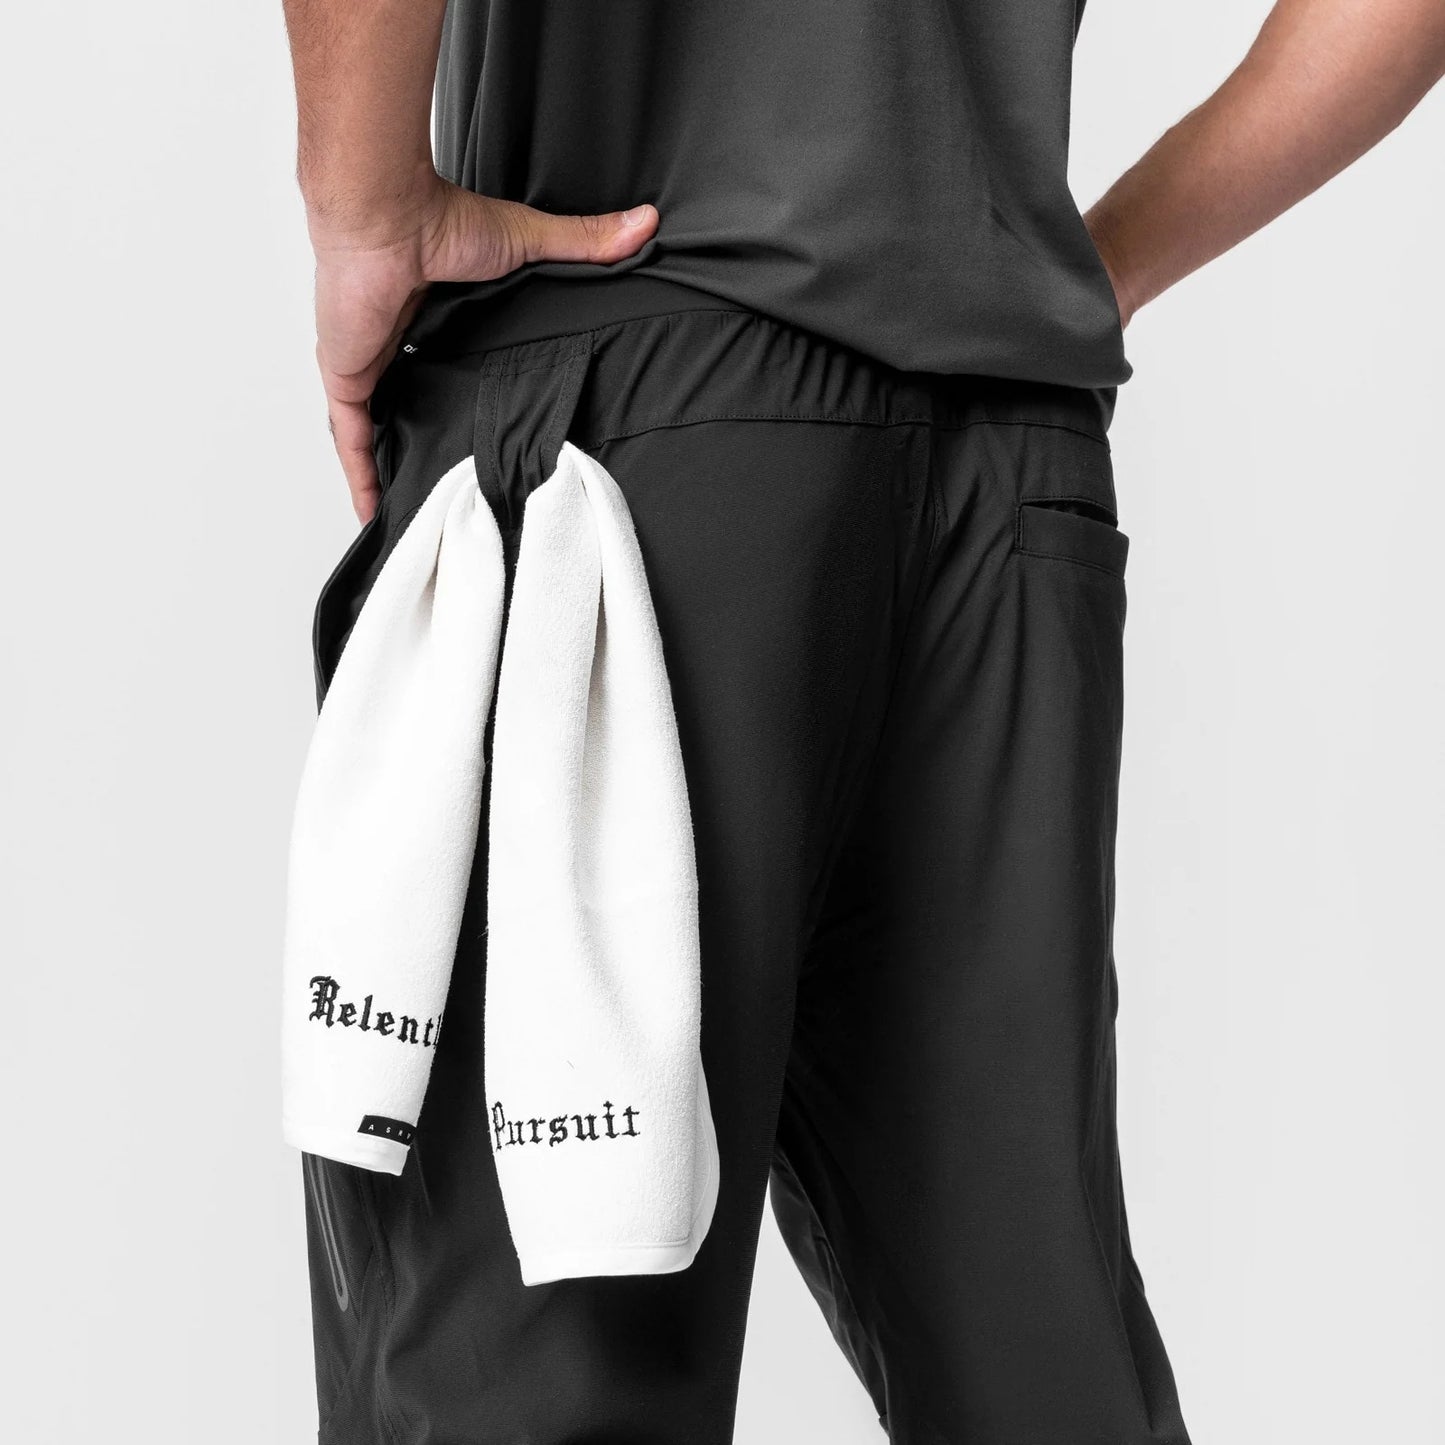 2023 New Fashion Gym Men's Sweatpants Casual Workouts Multi Pocket Casual Fitness Workout Jogging Training Pants